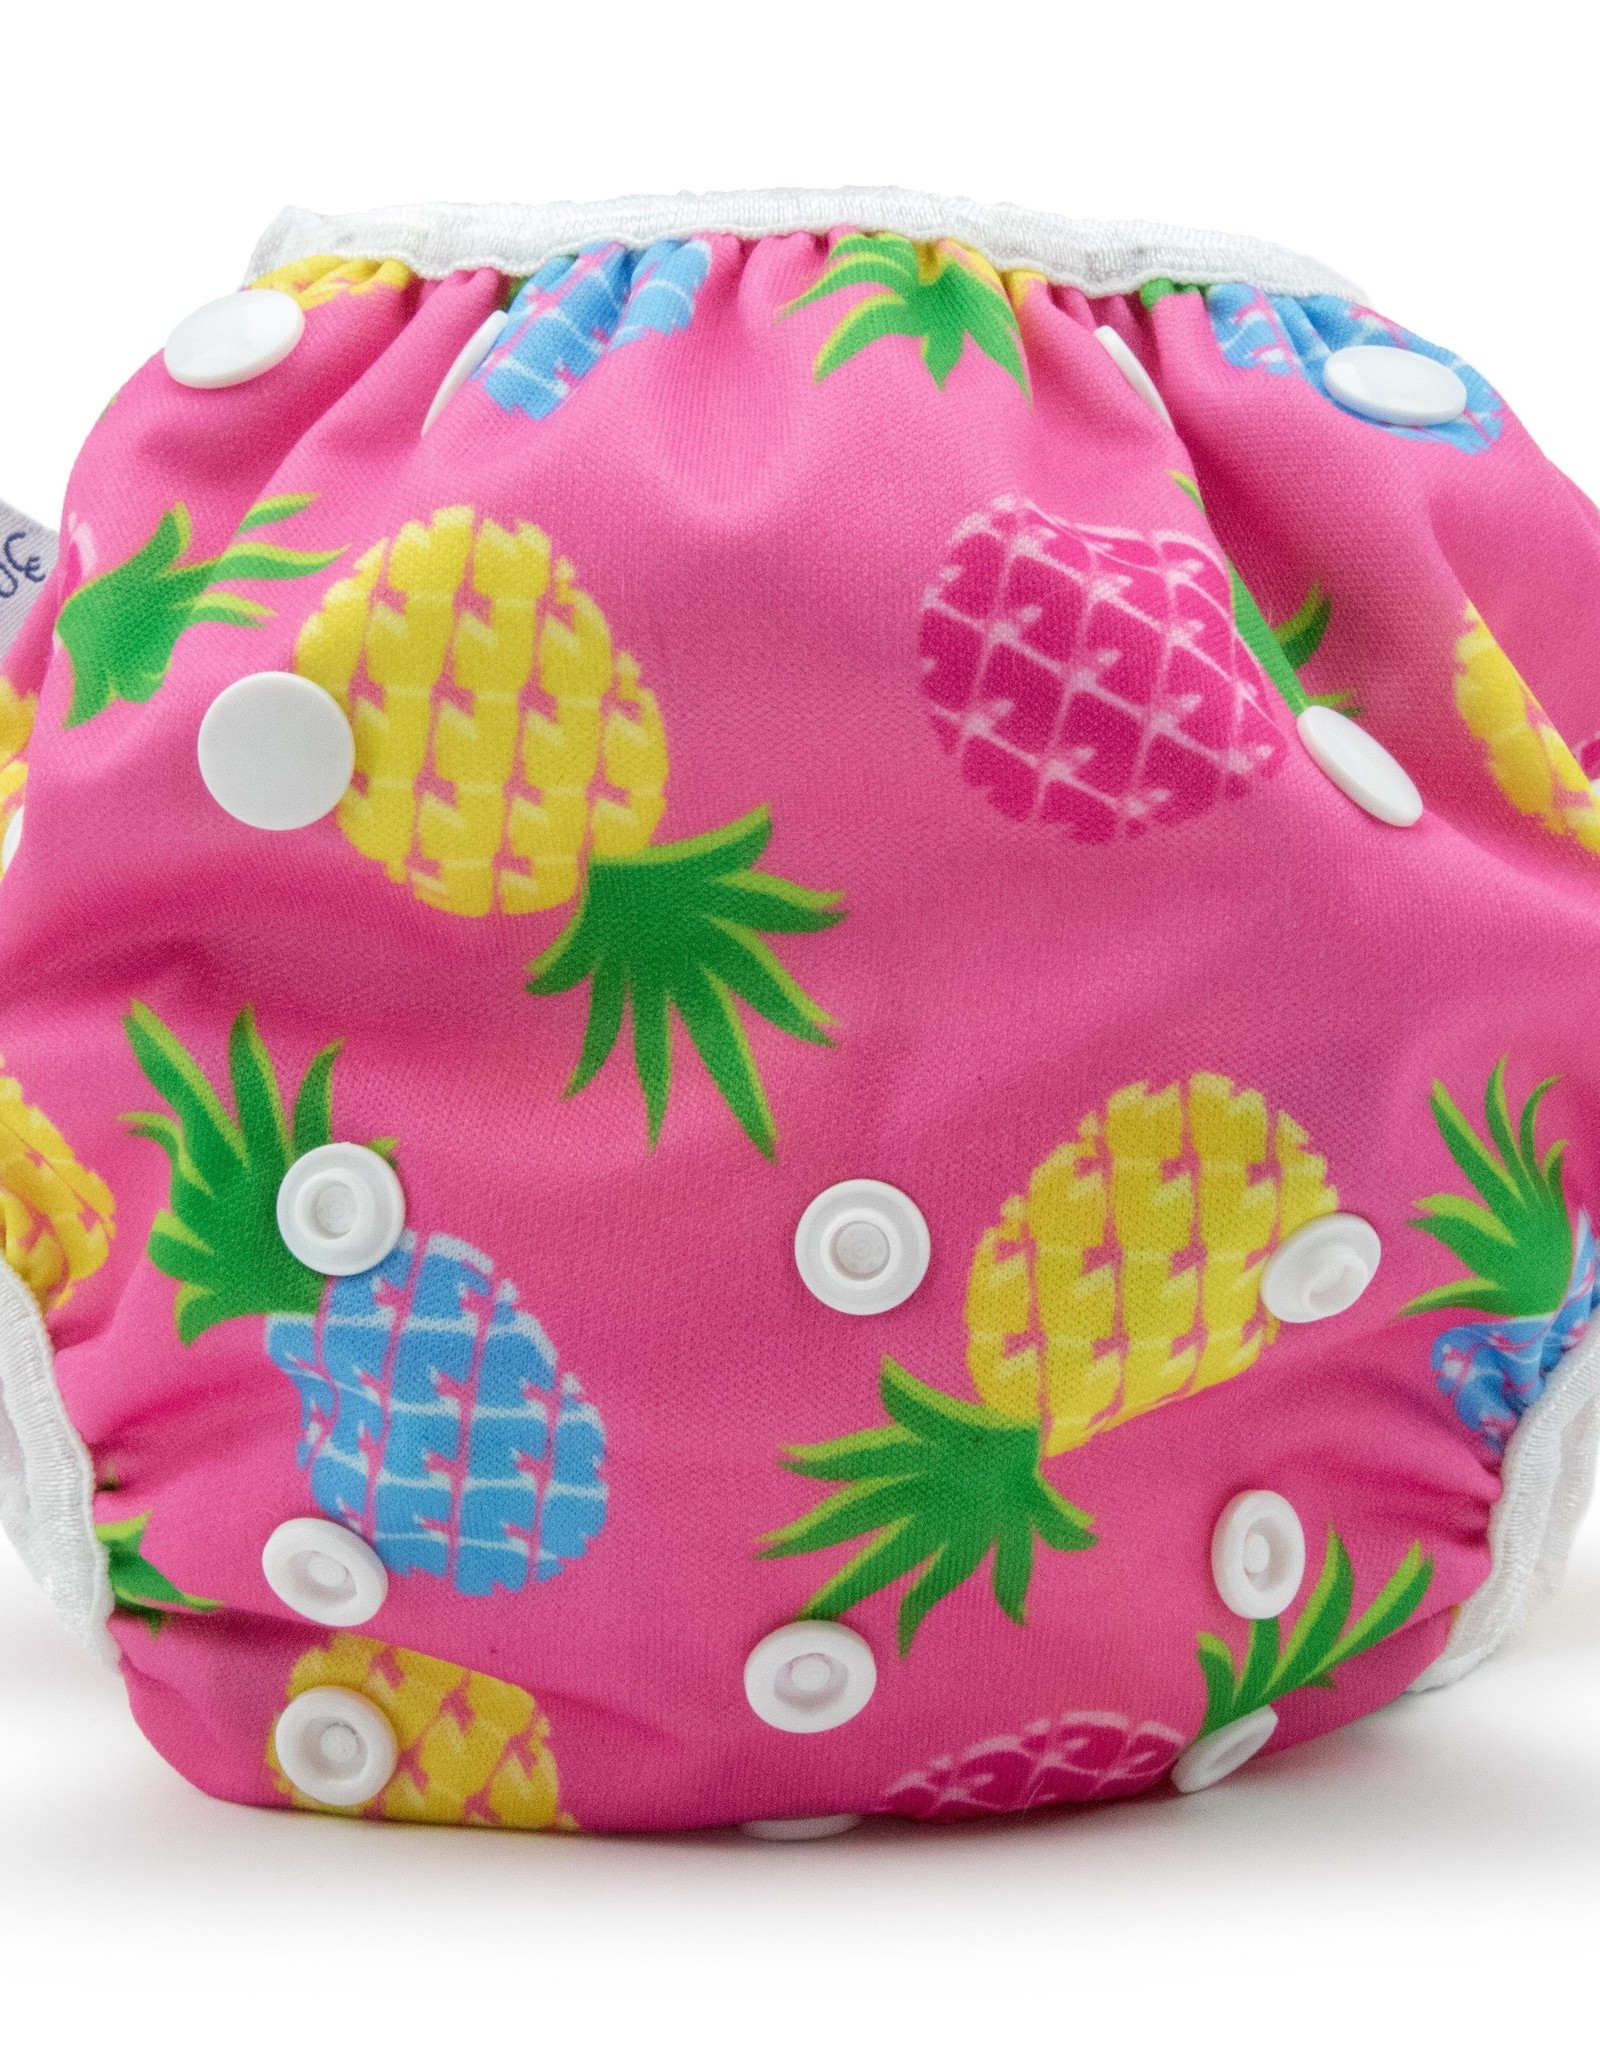 Anchors Reusable Swim Diaper, Adjustable 0-3 years or 2-5 Years  (0-36lbs/20-55lbs) Beau and Belle Littles